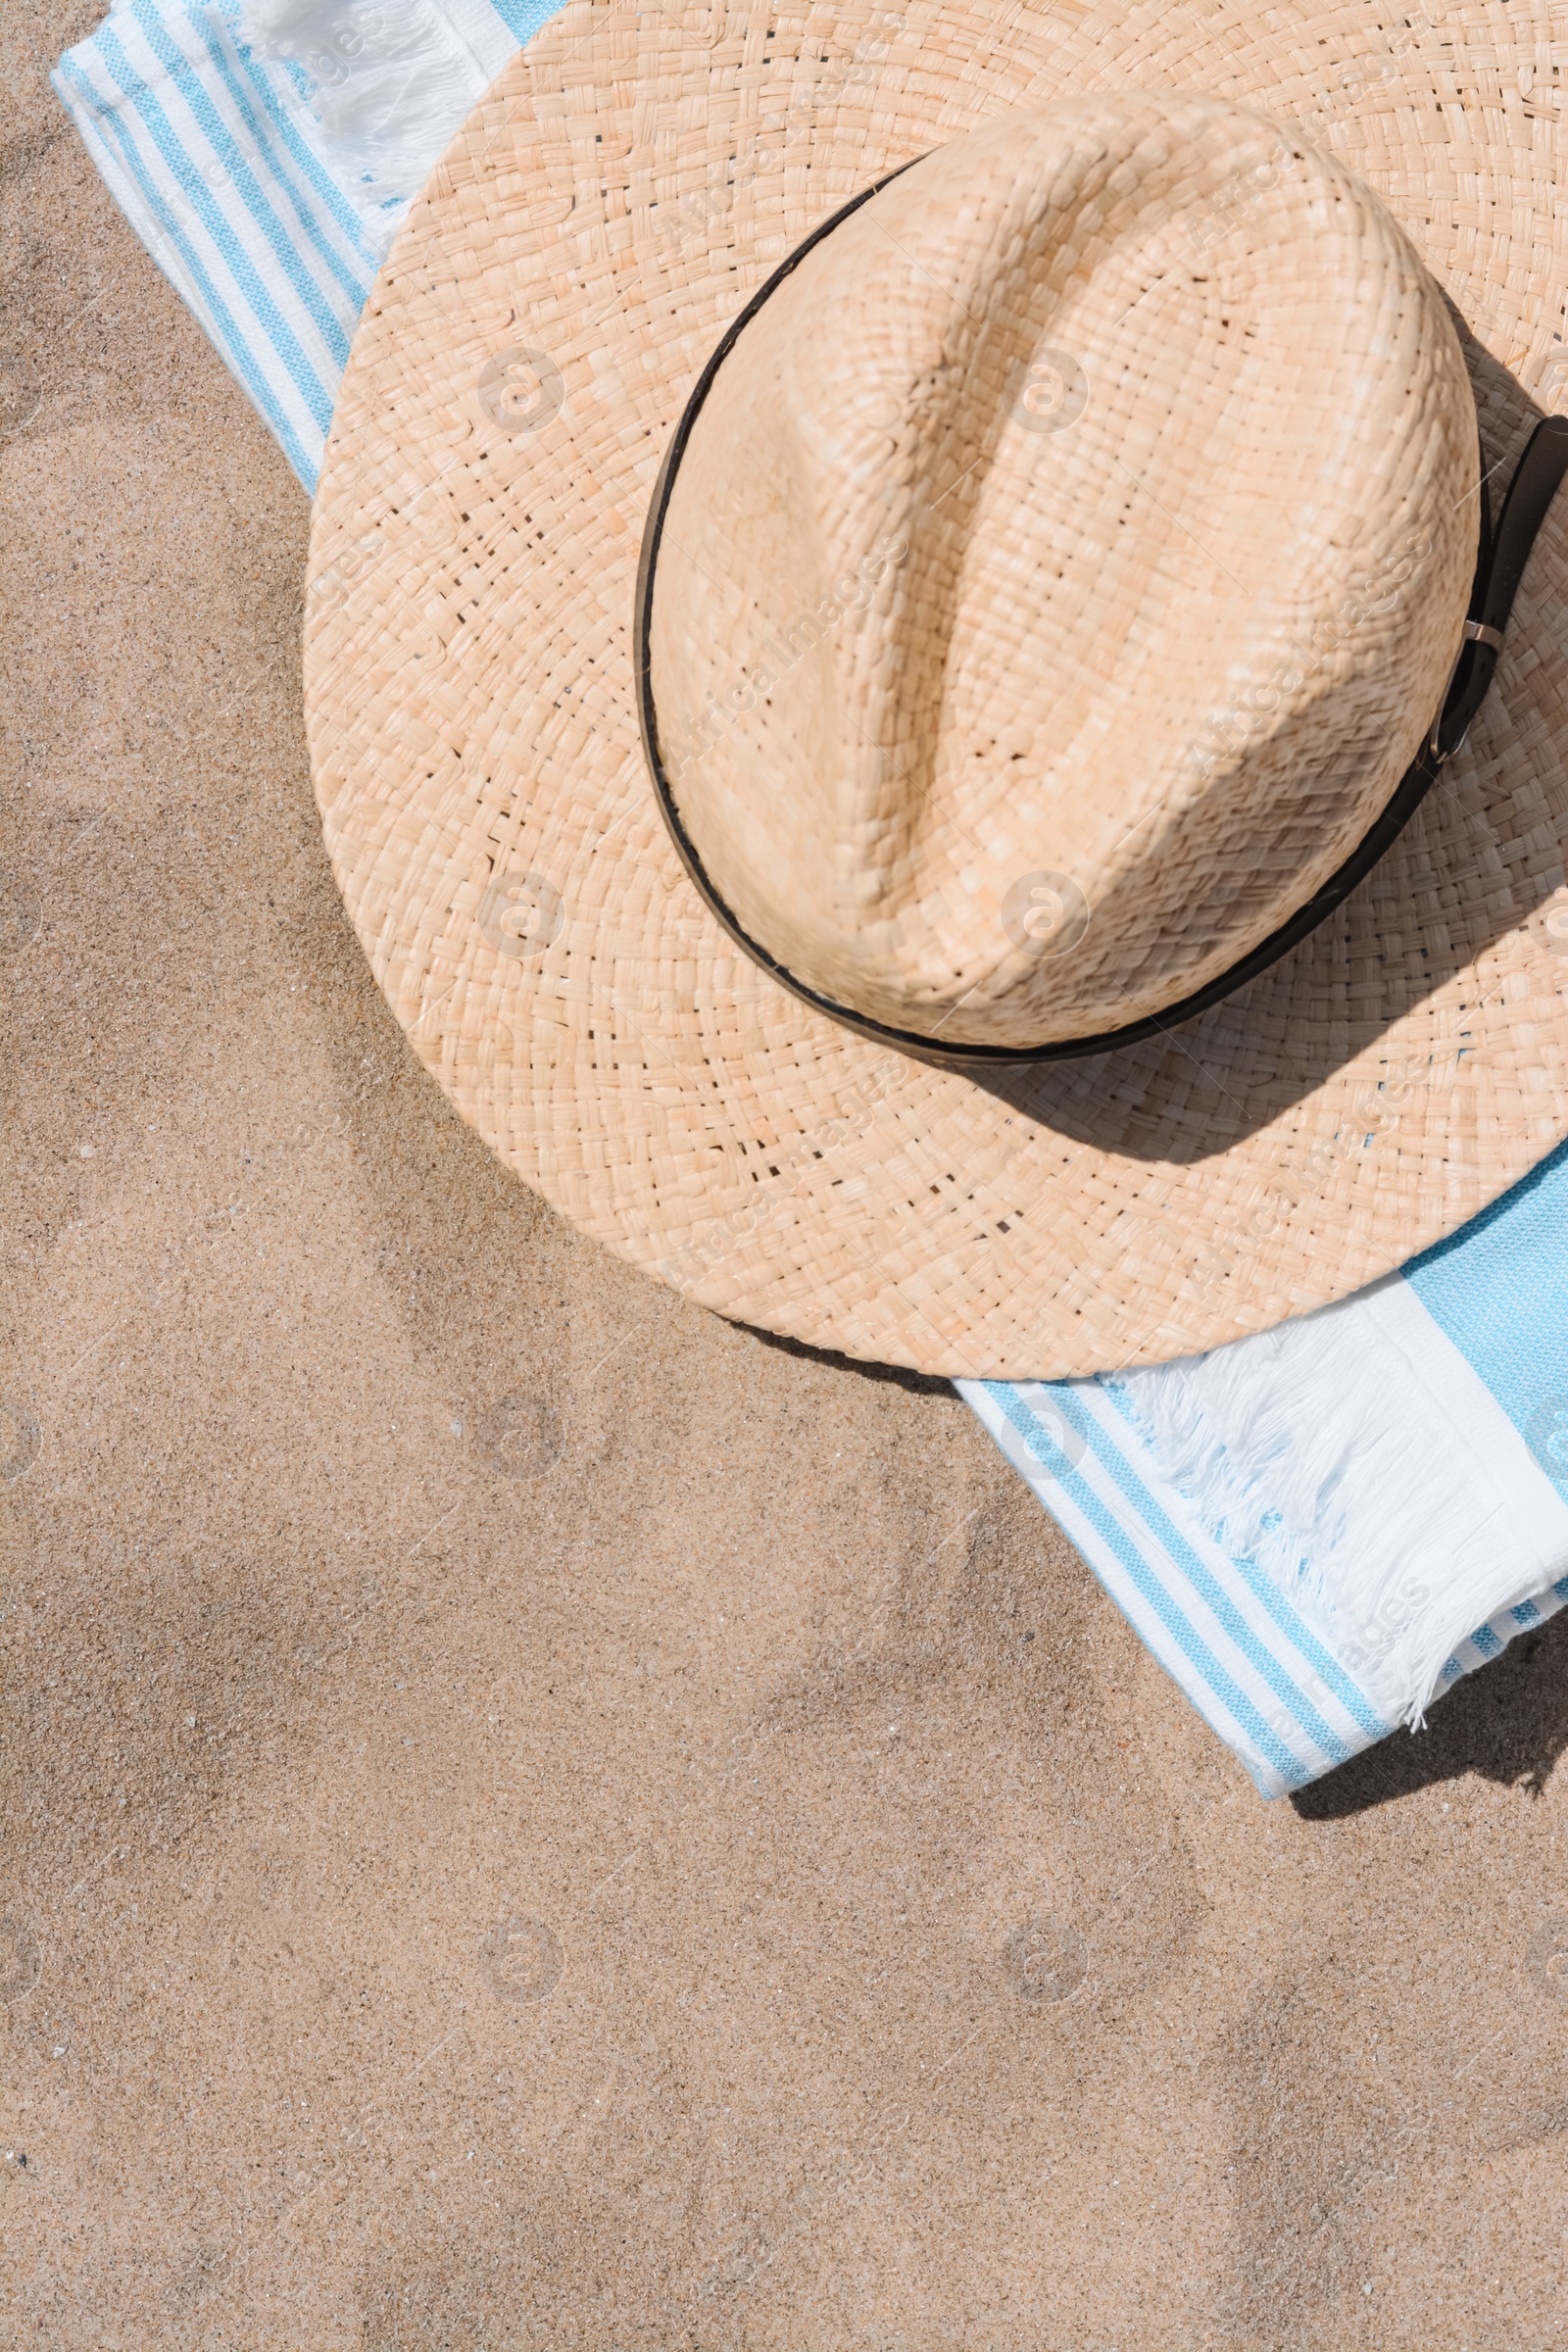 Photo of Straw hat and beach towel on sand, top view. Space for text